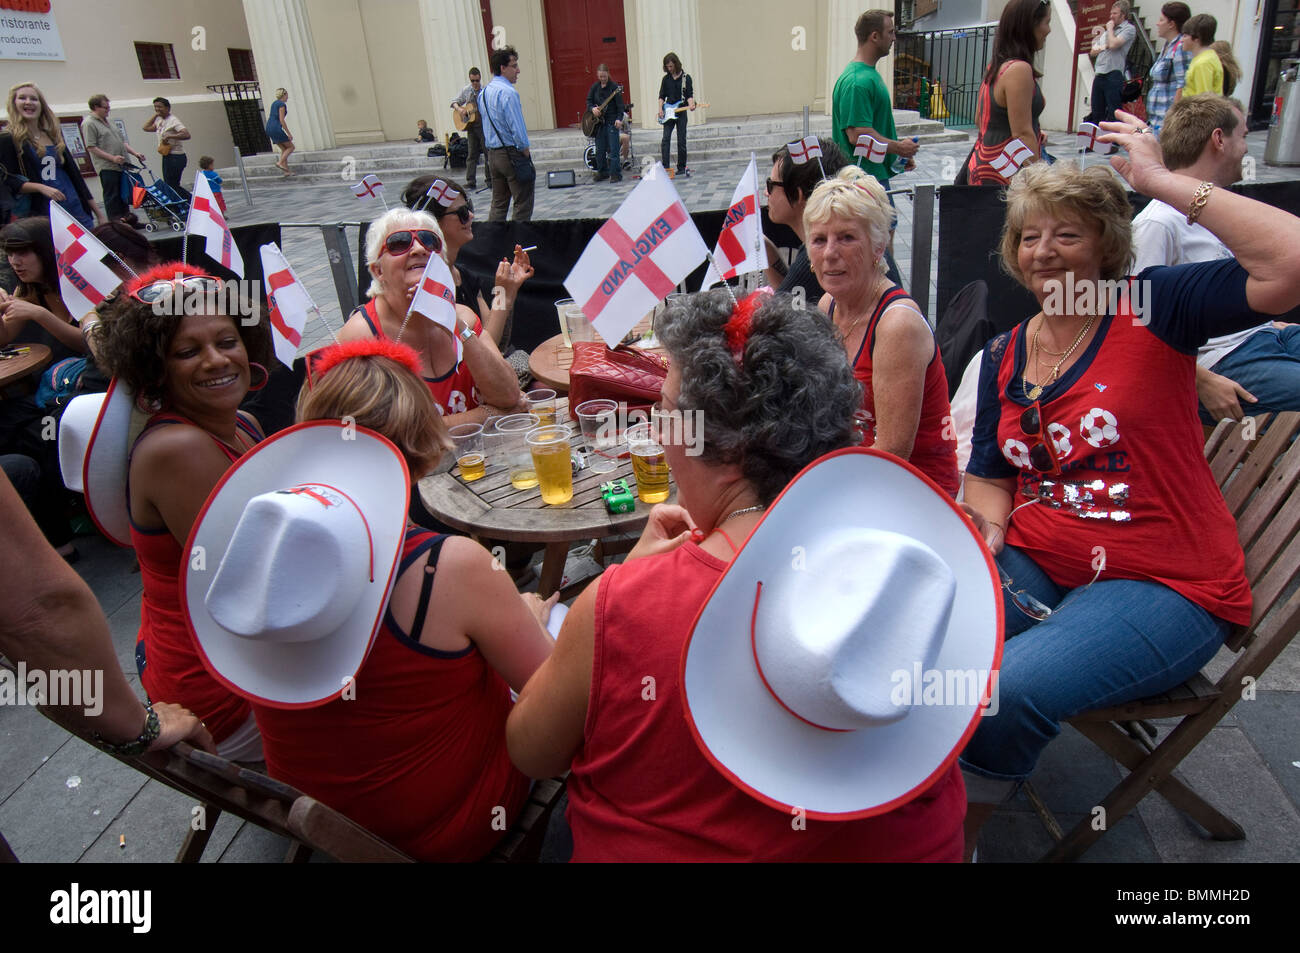 Female football supporters in England during the 2010 World Cup Stock Photo